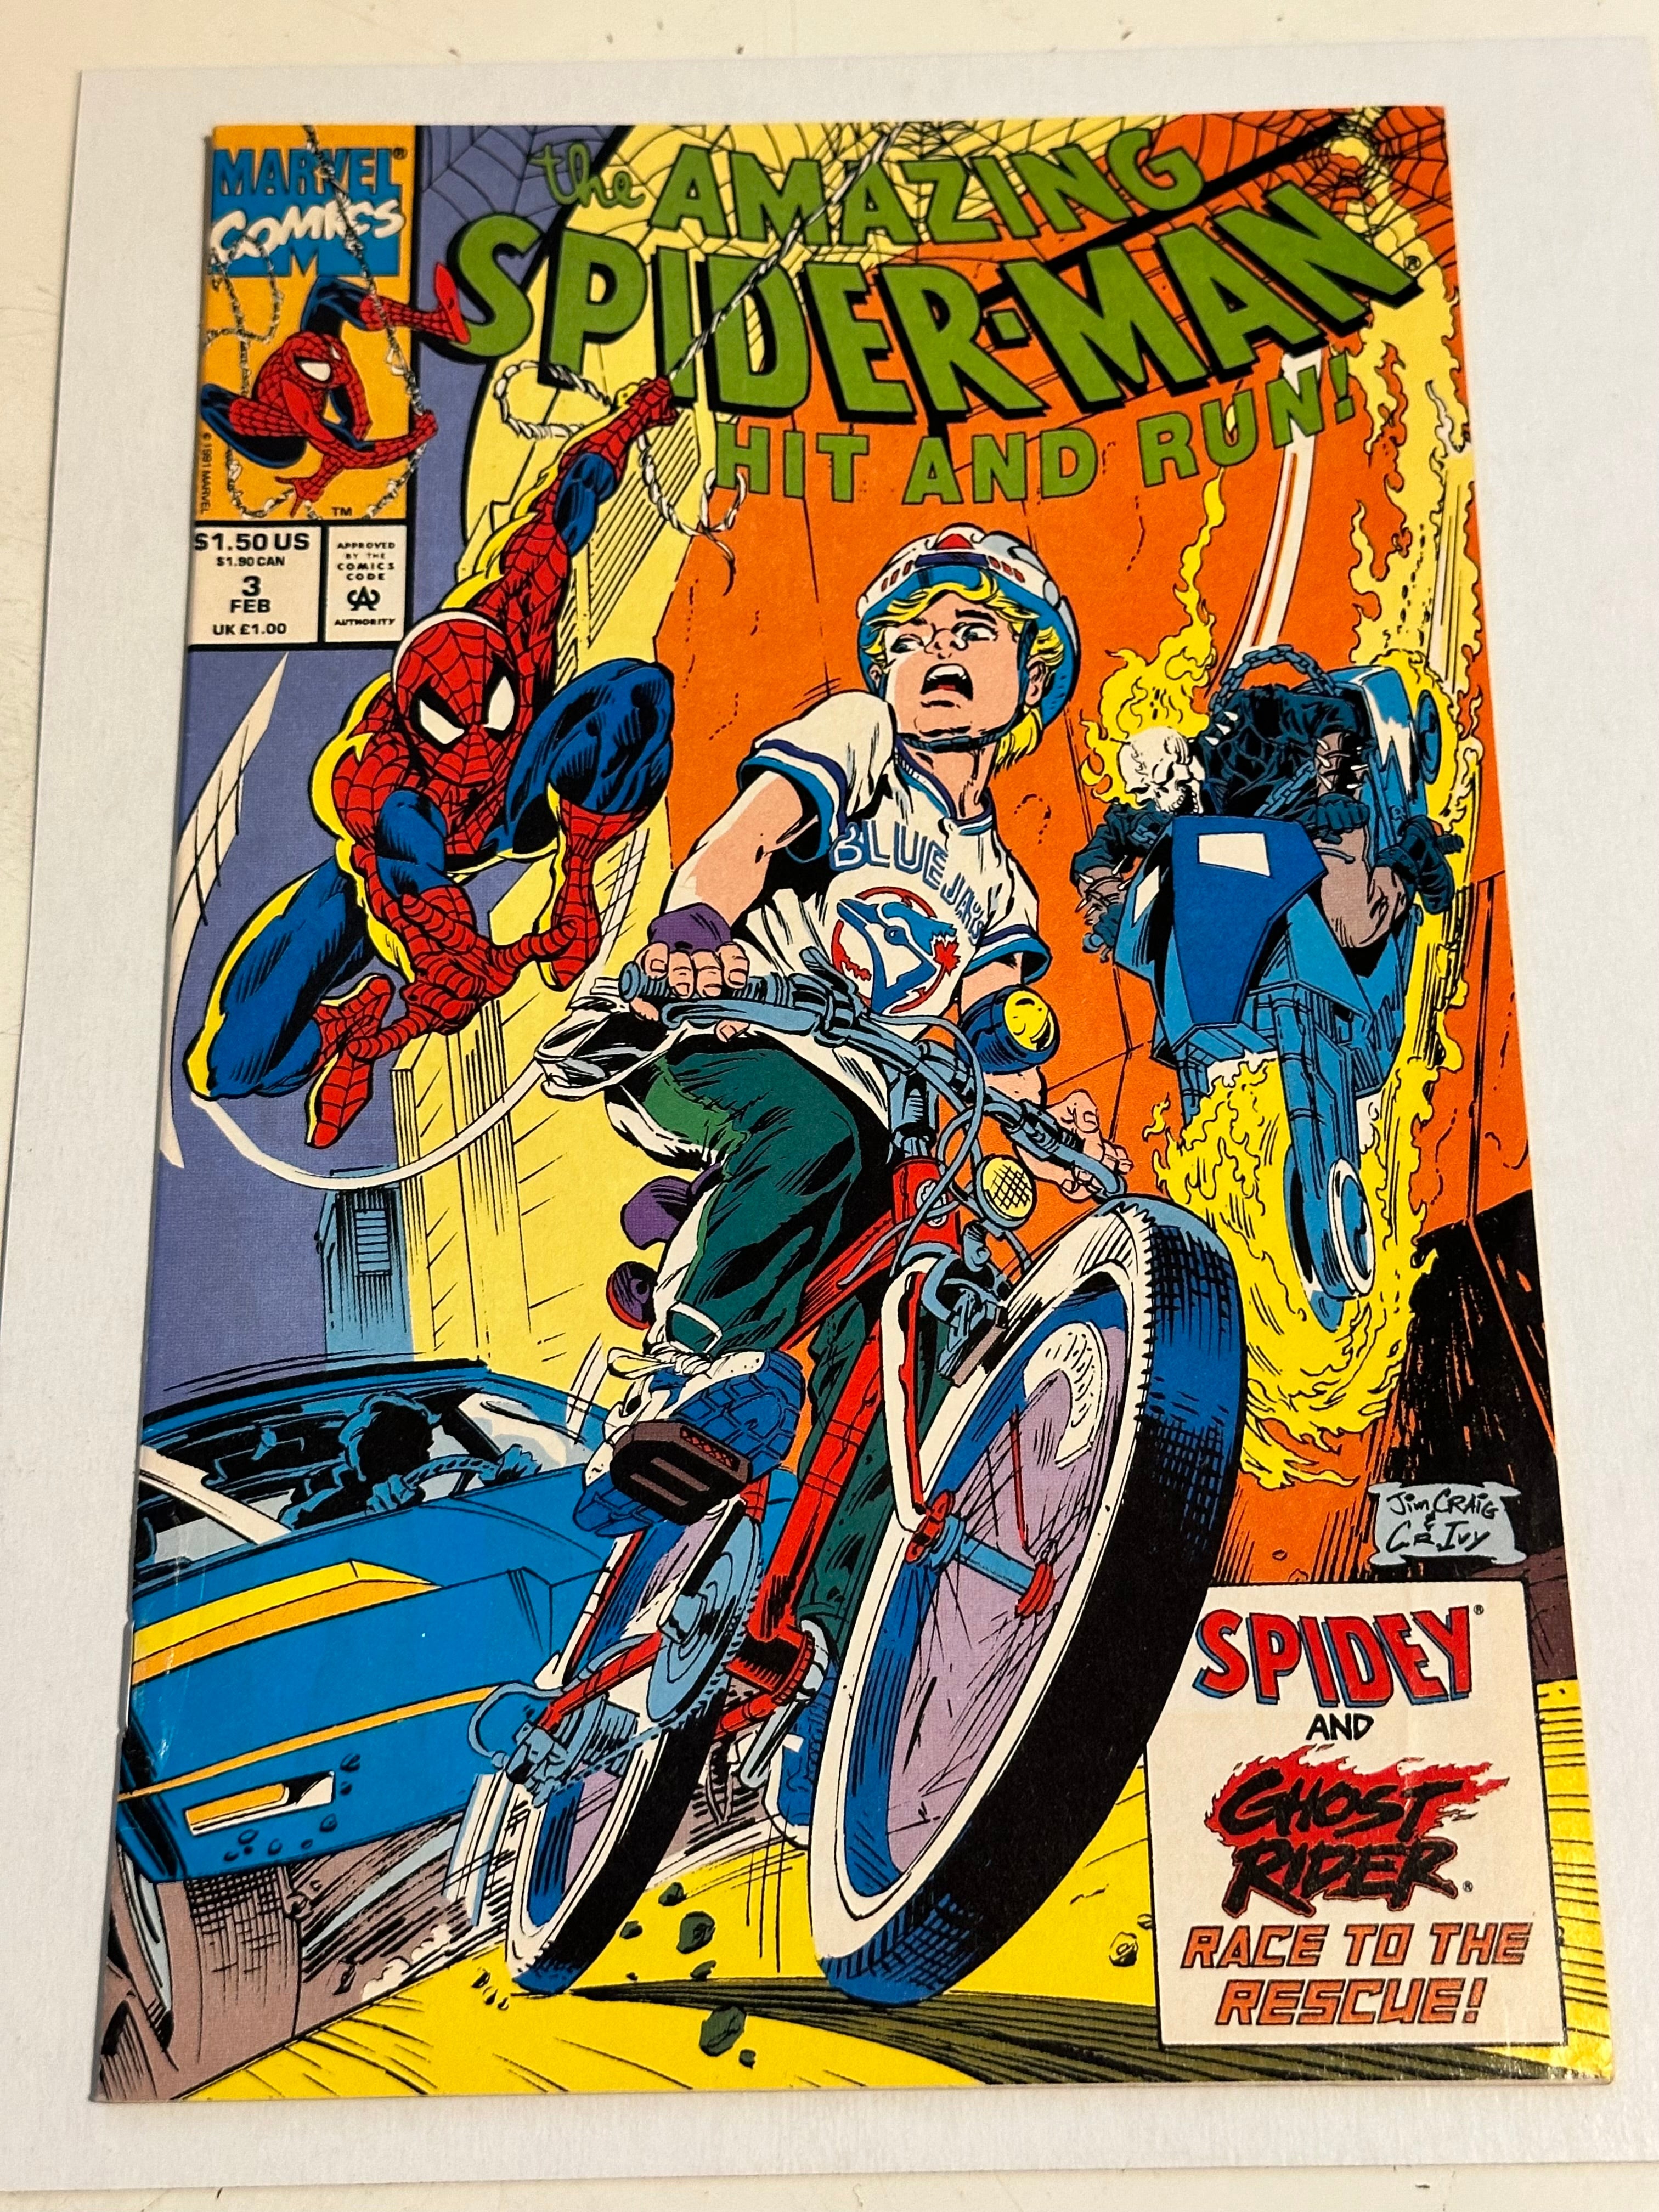 Amazing Spider-Man, hit-and-run limited, issued vintage marvel comic